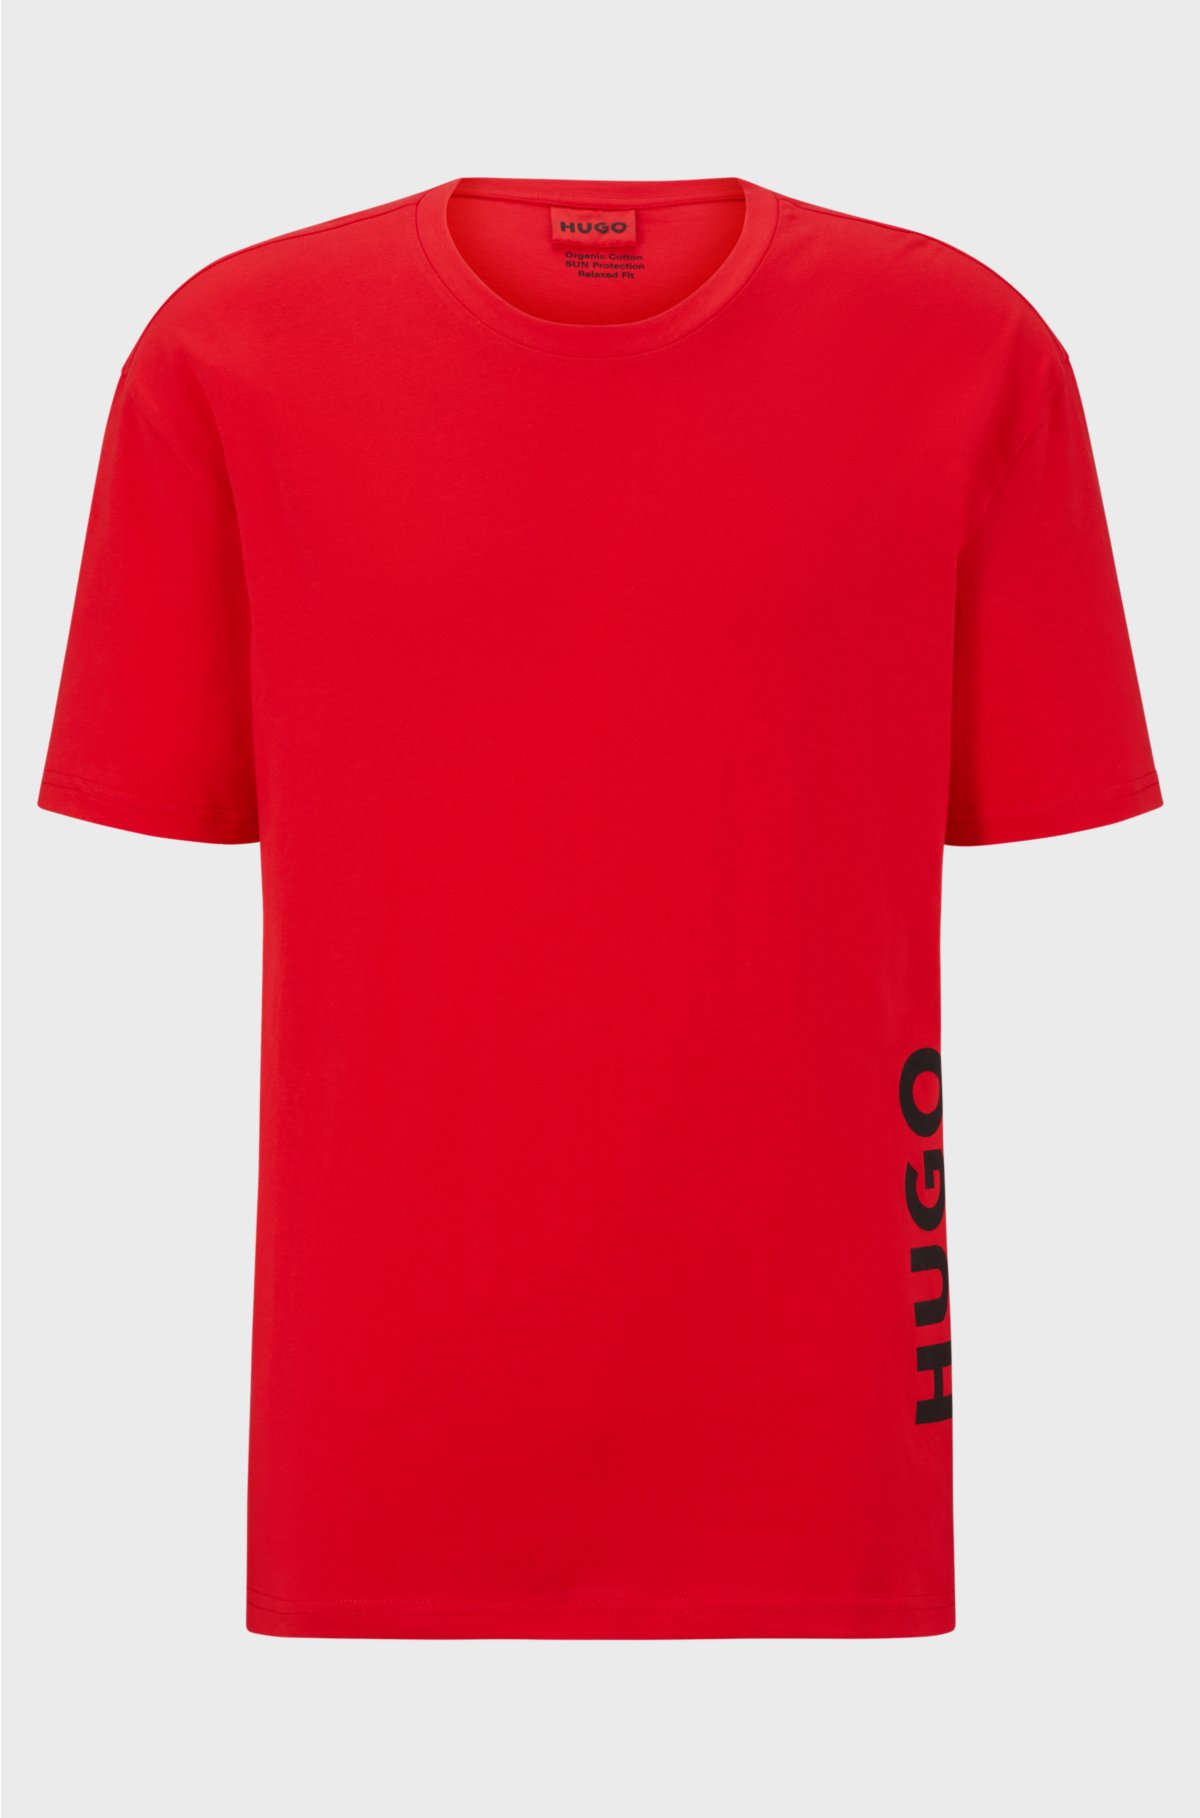 Cotton-jersey T-shirt with SPF 50+ UV protection, Red